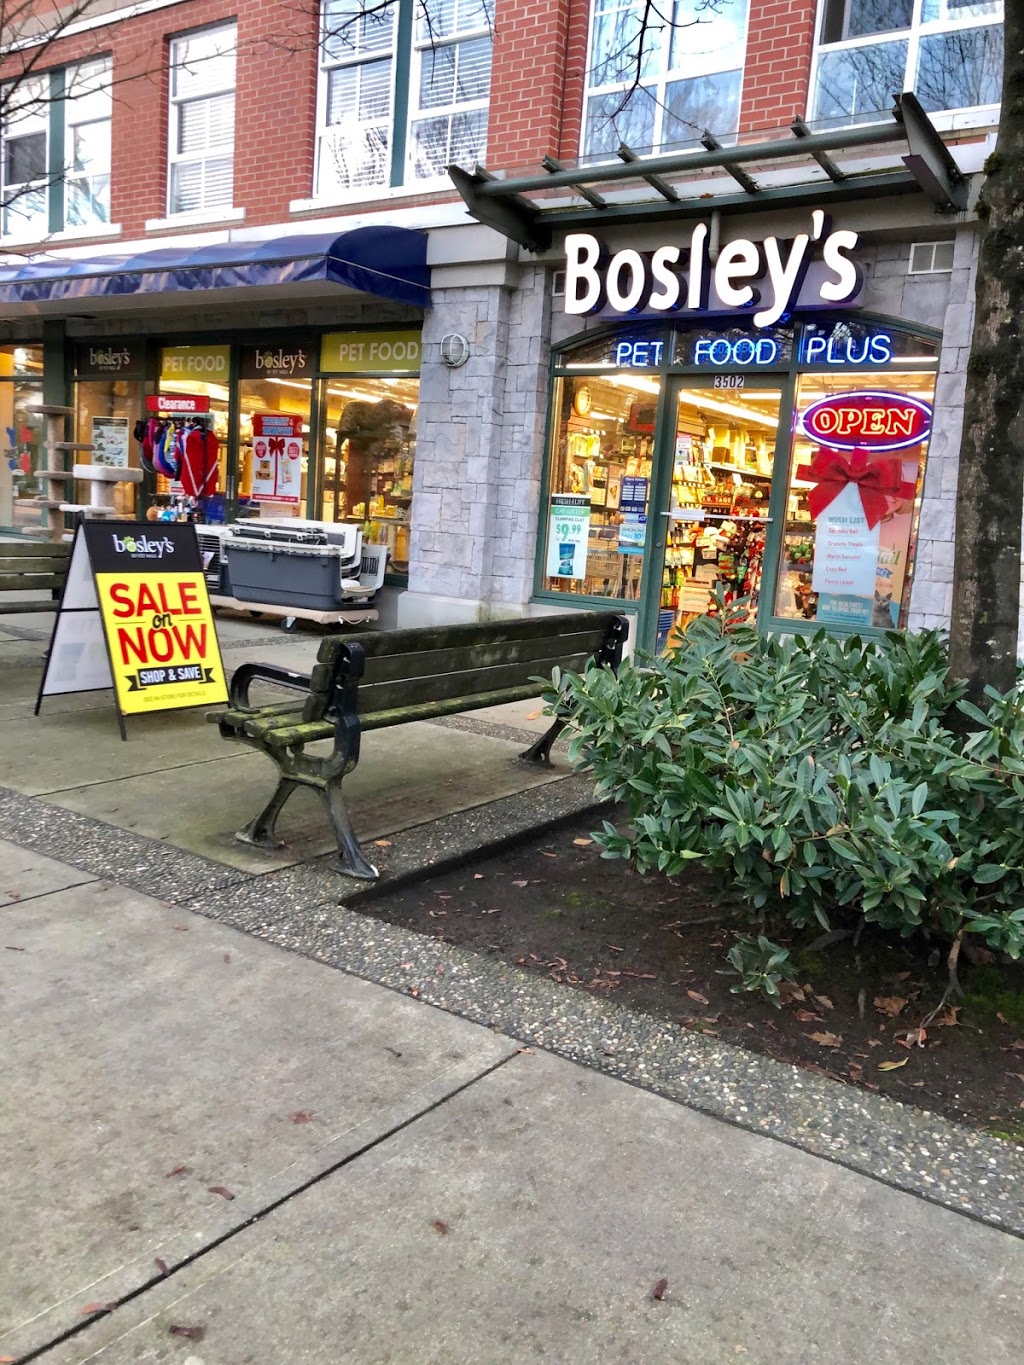 Bosleys by Pet Valu | 3502 W 41st Ave, Vancouver, BC V6N 3E6, Canada | Phone: (604) 266-2667